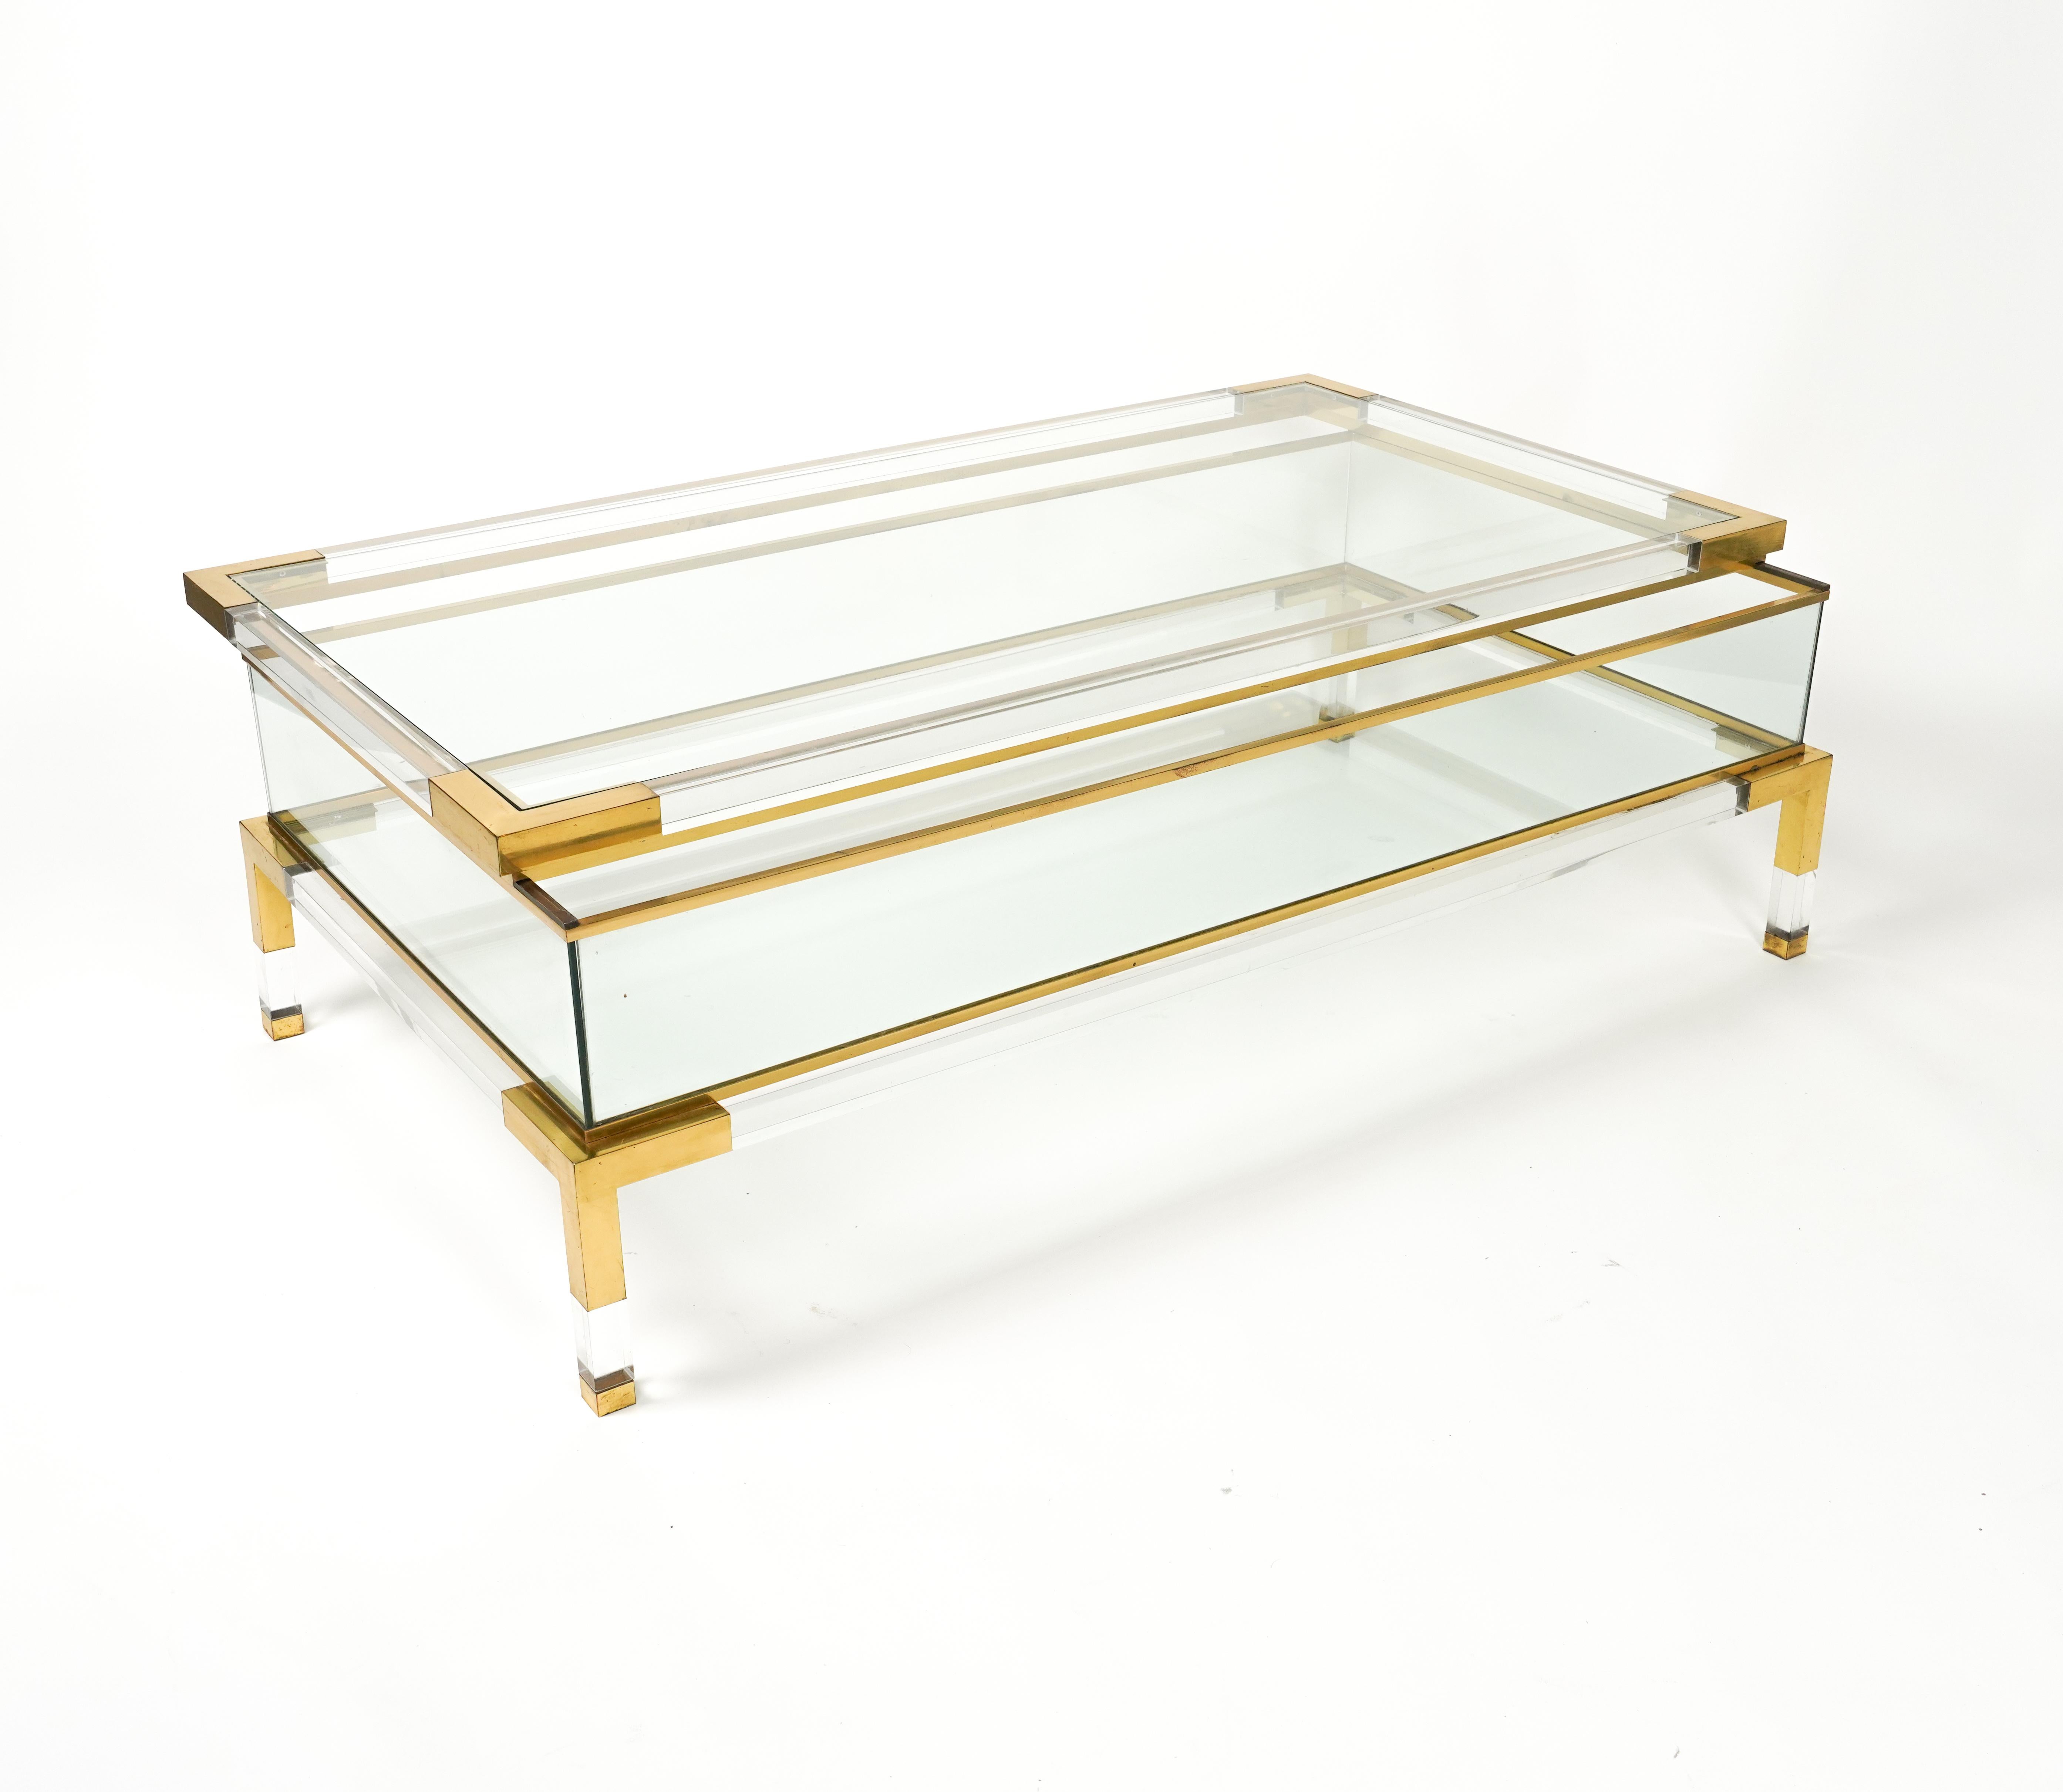 Beautiful mid-century rectangular coffee table in brass, lucite and glass with sliding top shelf. 

This fantastic piece was attributed to Maison Jansen in France during the 1970s.

This fantastic item is in good condition and has a double glazed